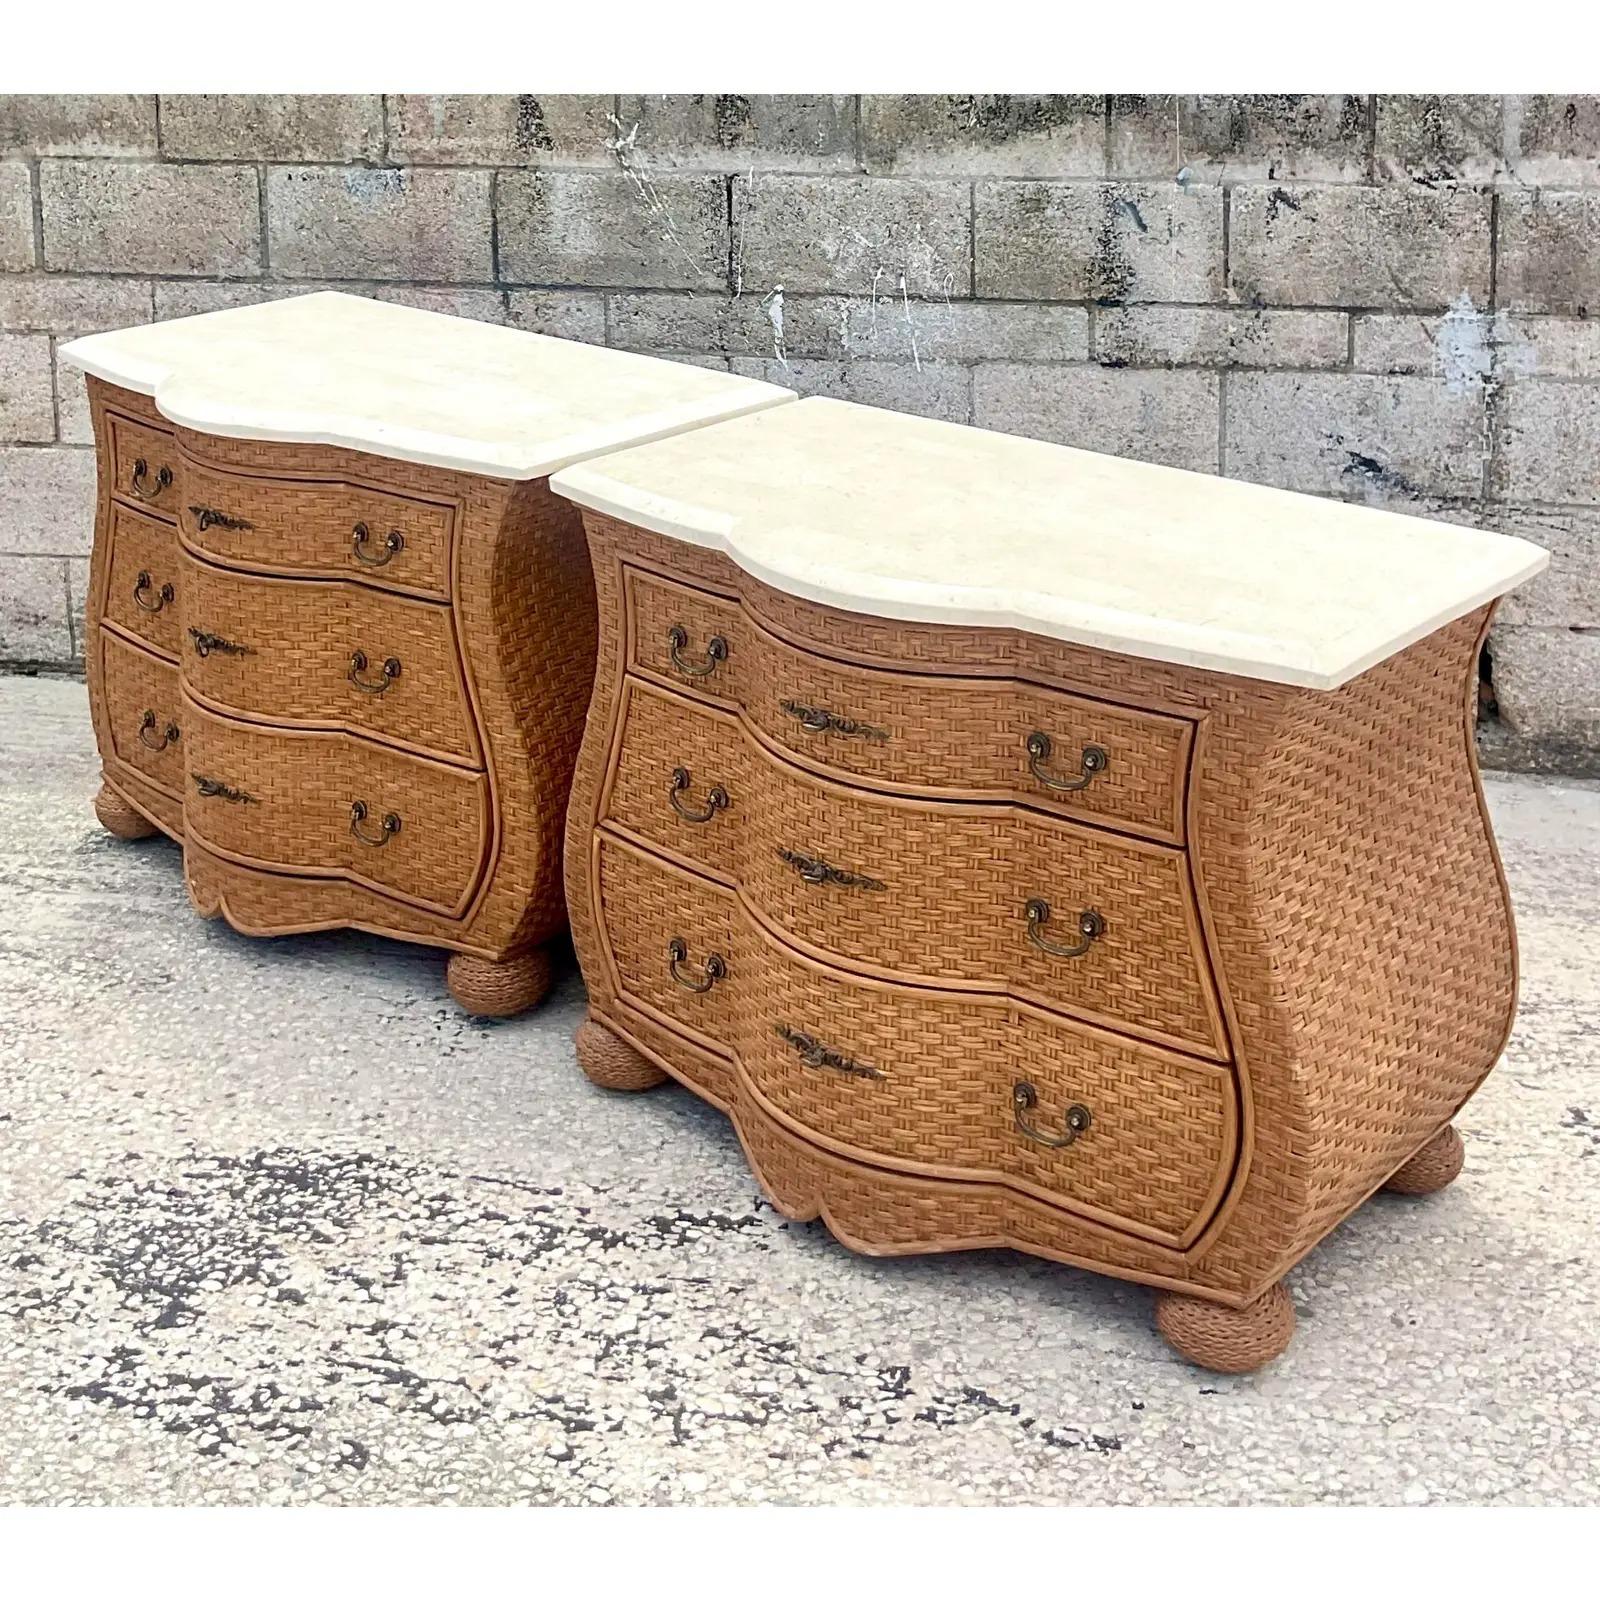 Fantastic pair of vintage Coastal chests of drawers. Beautiful woven rattan in a chic Bombe shape. Tessellated stone tops. Acquired from a Palm Beach estate.